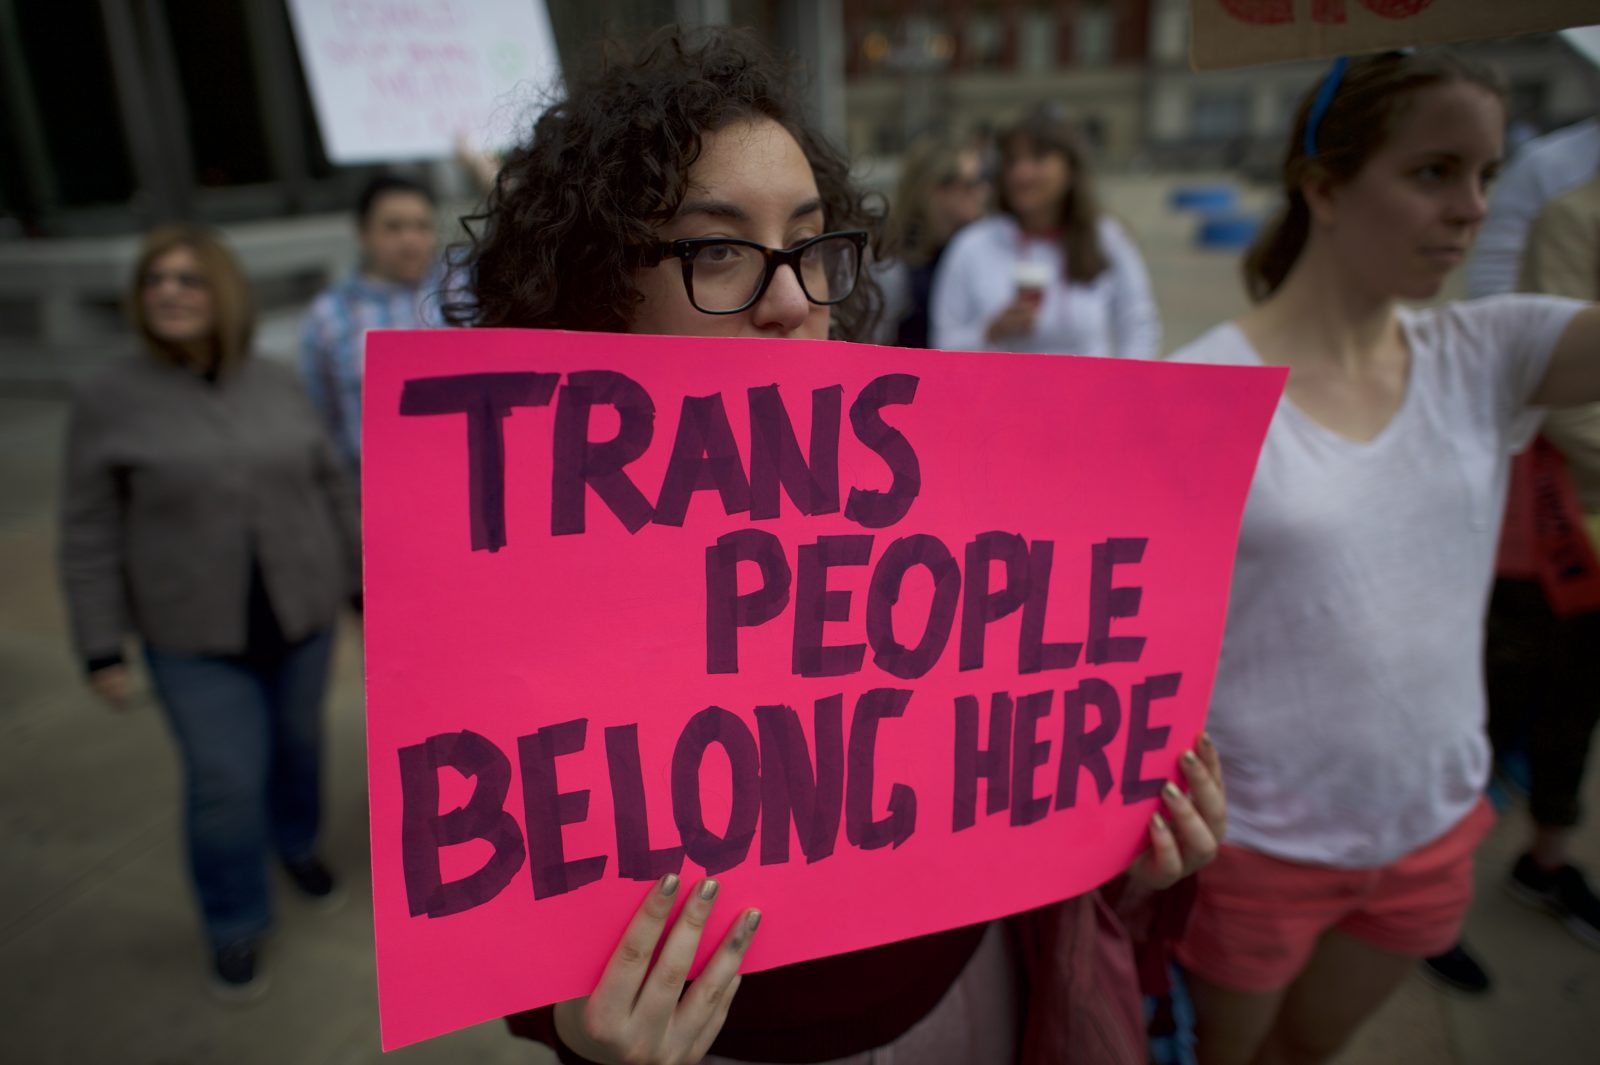 Shemale In New York State - Shemale: Why you should never use this anti-trans slur